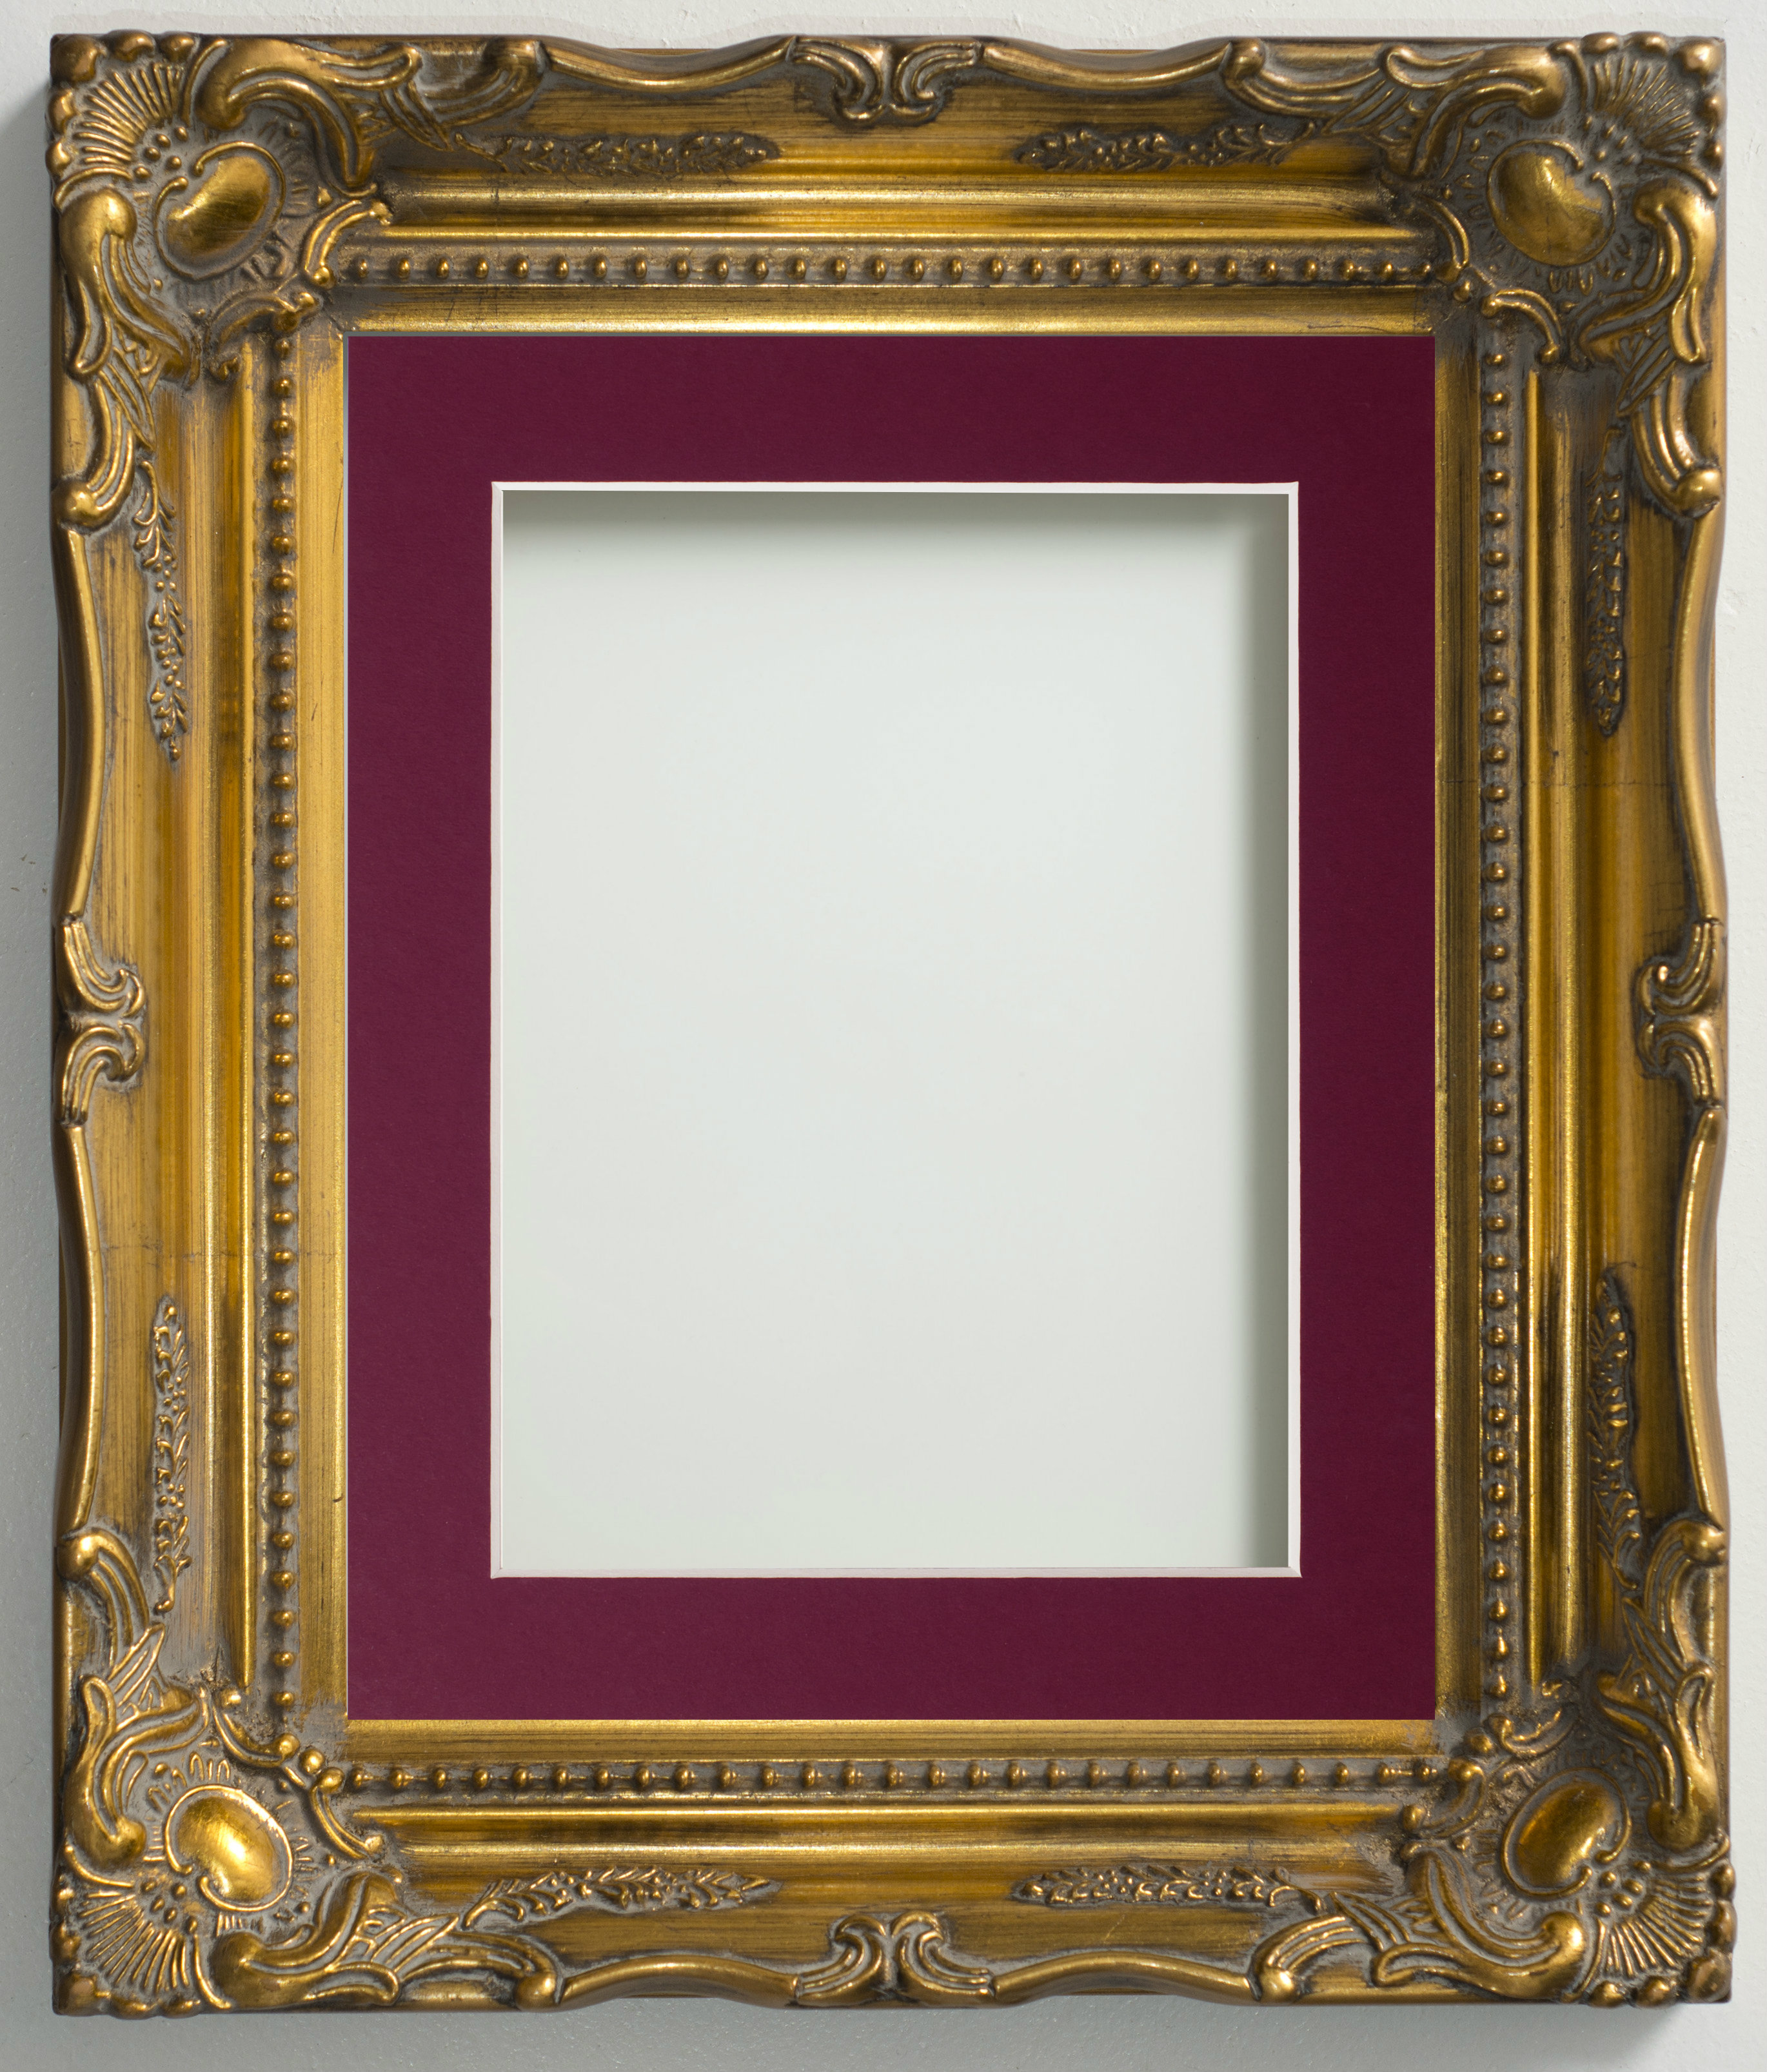  Frame Company Langley Range Ornate Gold Picture Photo 